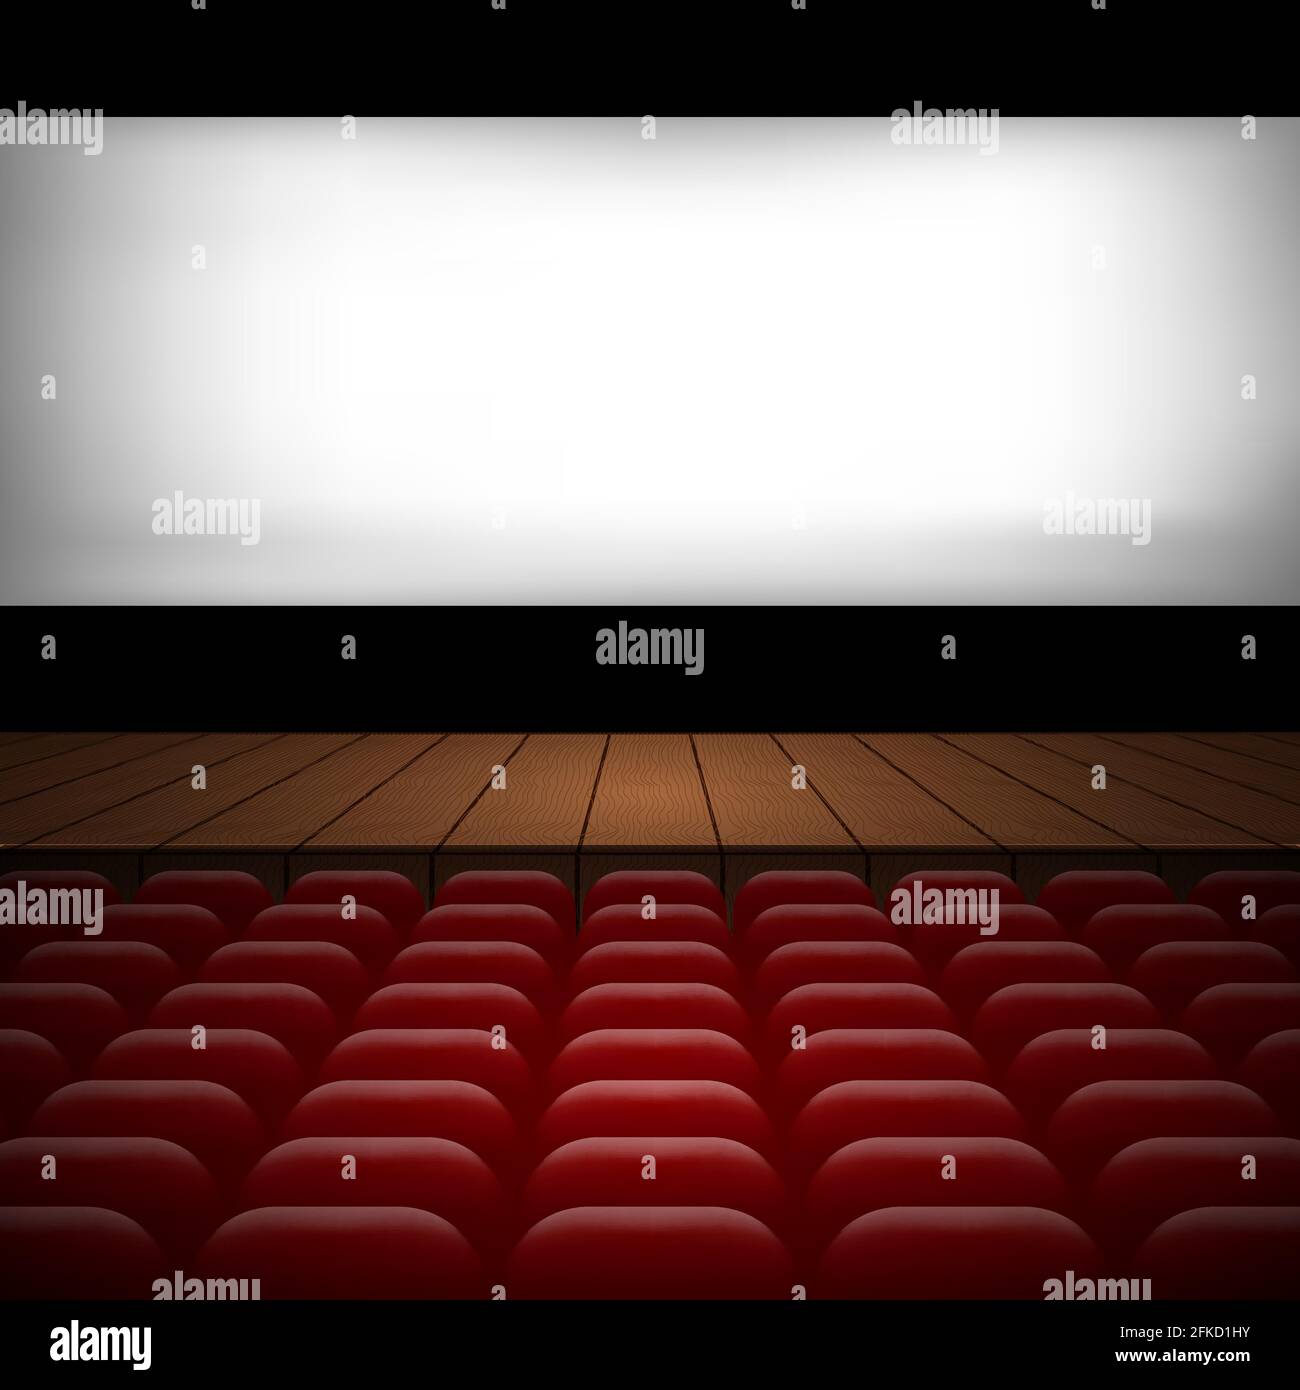 illustration of the interior of a cinema movie theatre with red ...